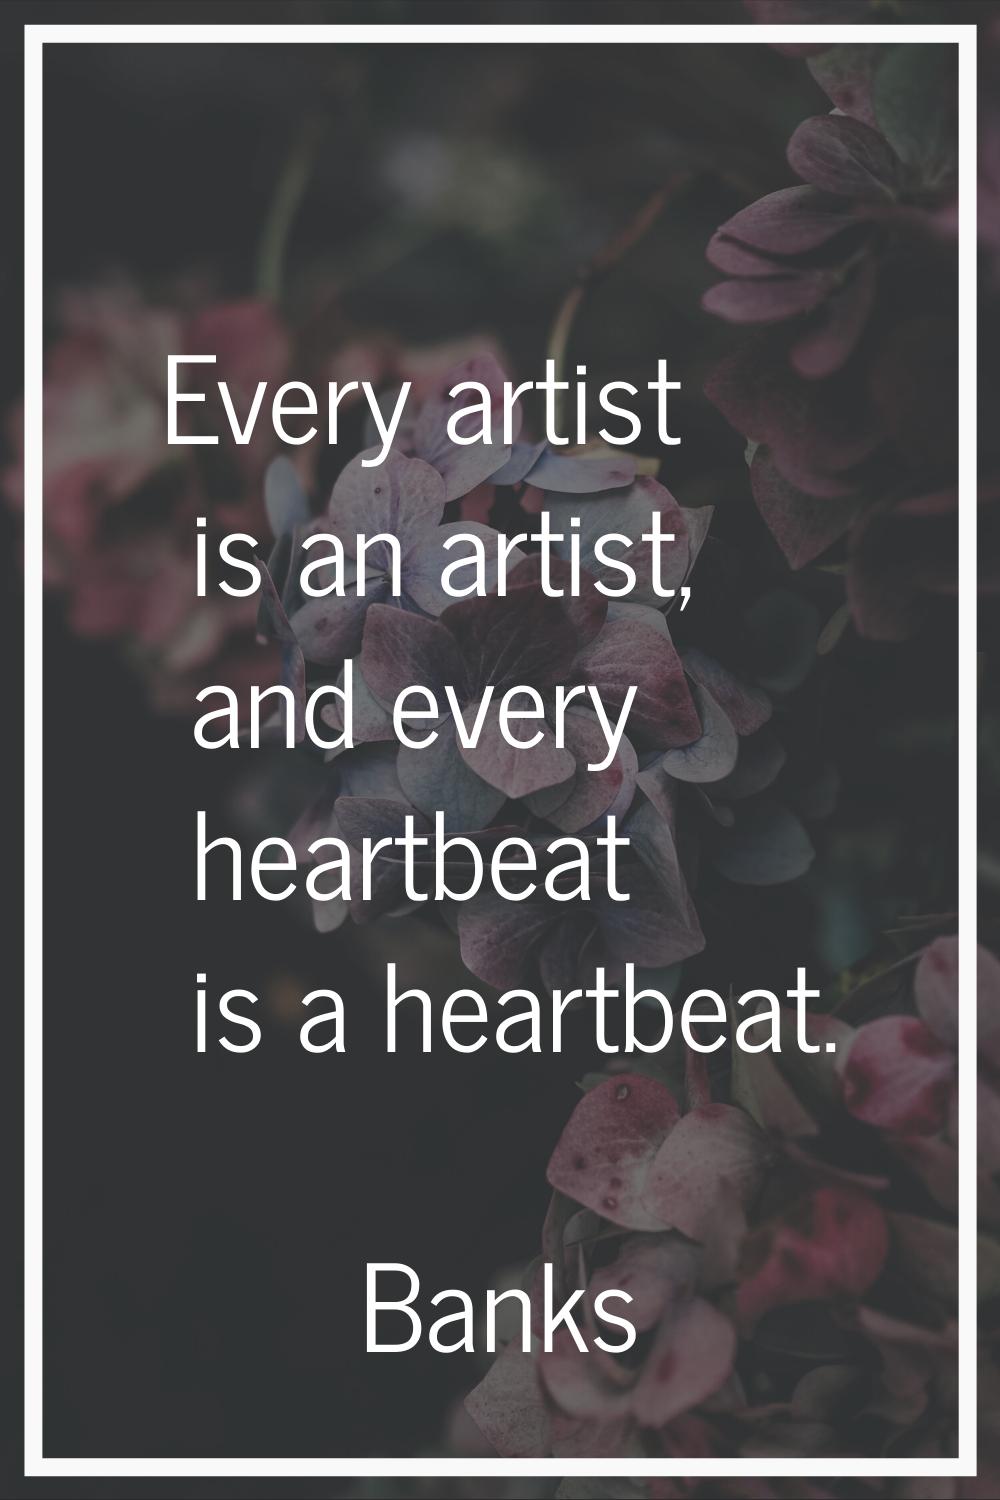 Every artist is an artist, and every heartbeat is a heartbeat.